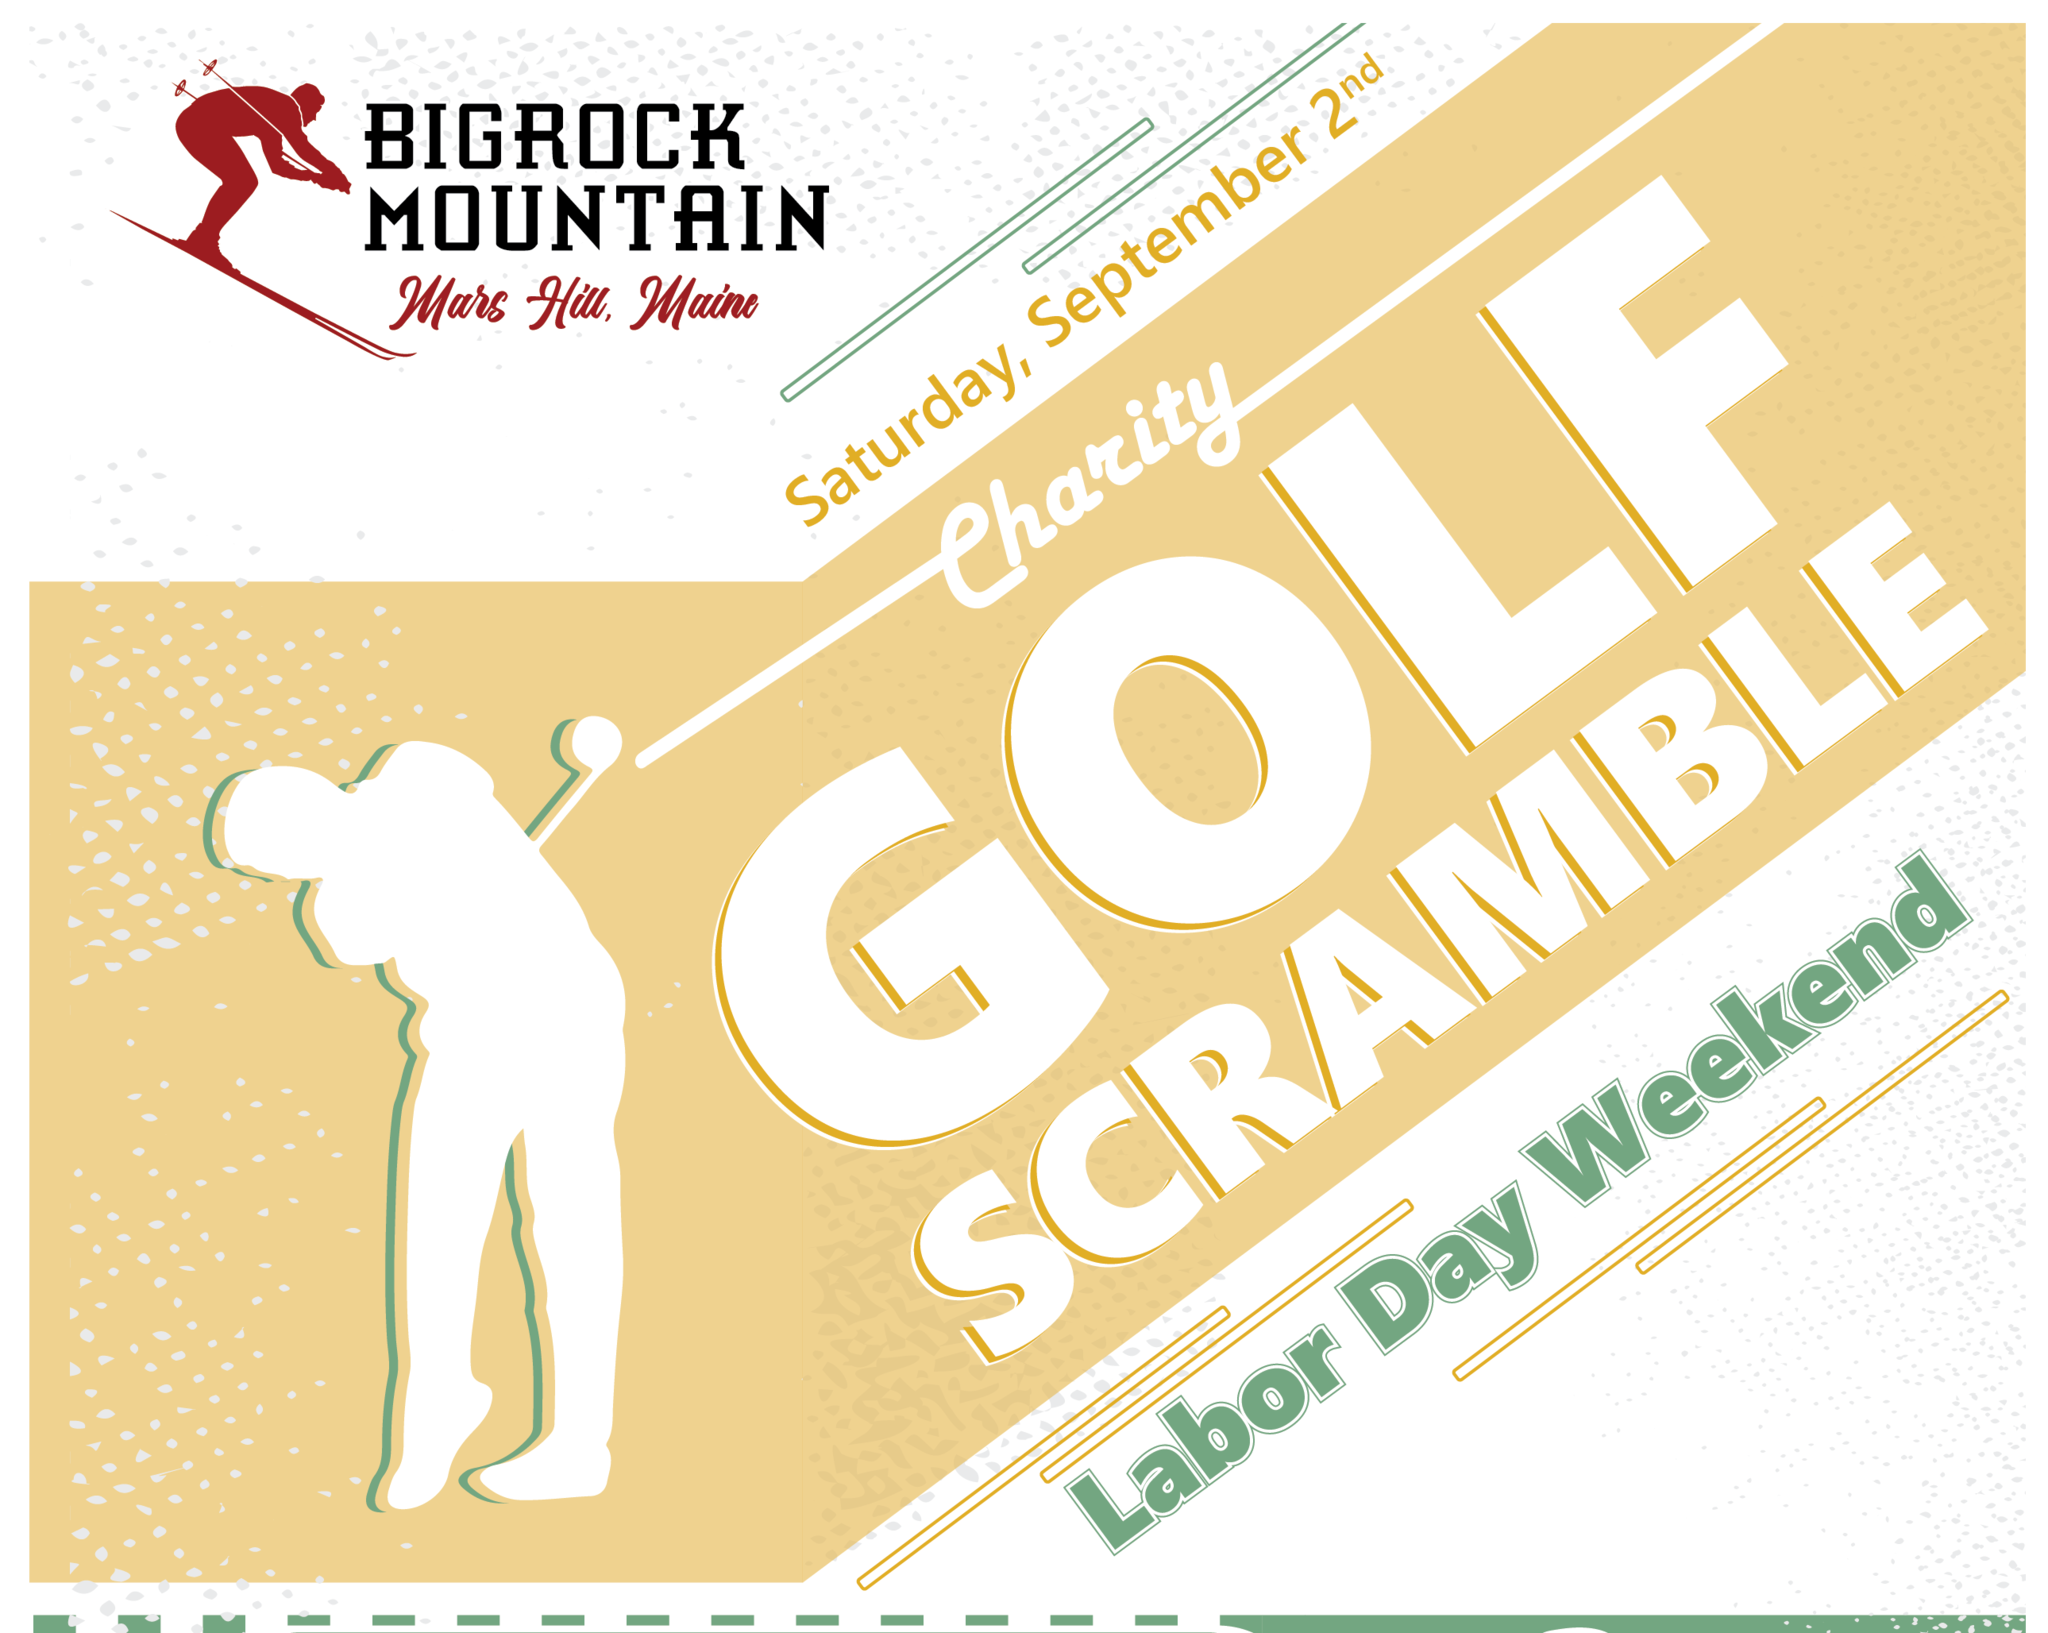 Chairty Golf Scramble Memorial Day Weekend